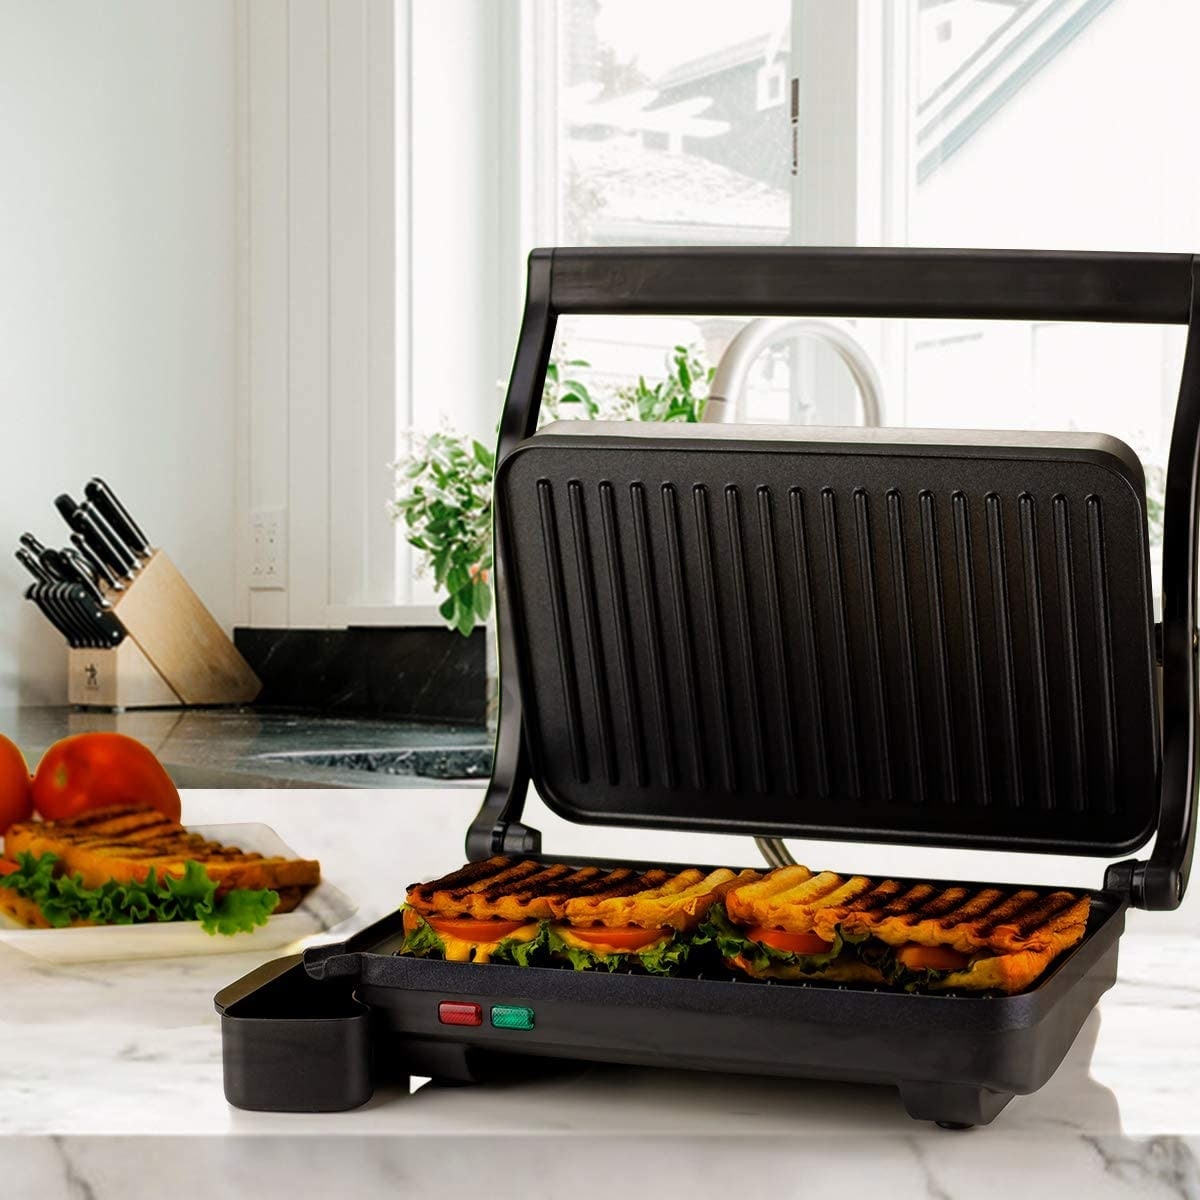 https://ak1.ostkcdn.com/images/products/is/images/direct/f3d720874df68e9a3f9652276d4a208636cb9402/Ovente-Electric-Panini-Press-Grill-Sandwich-Maker-GP0620-Series.jpg